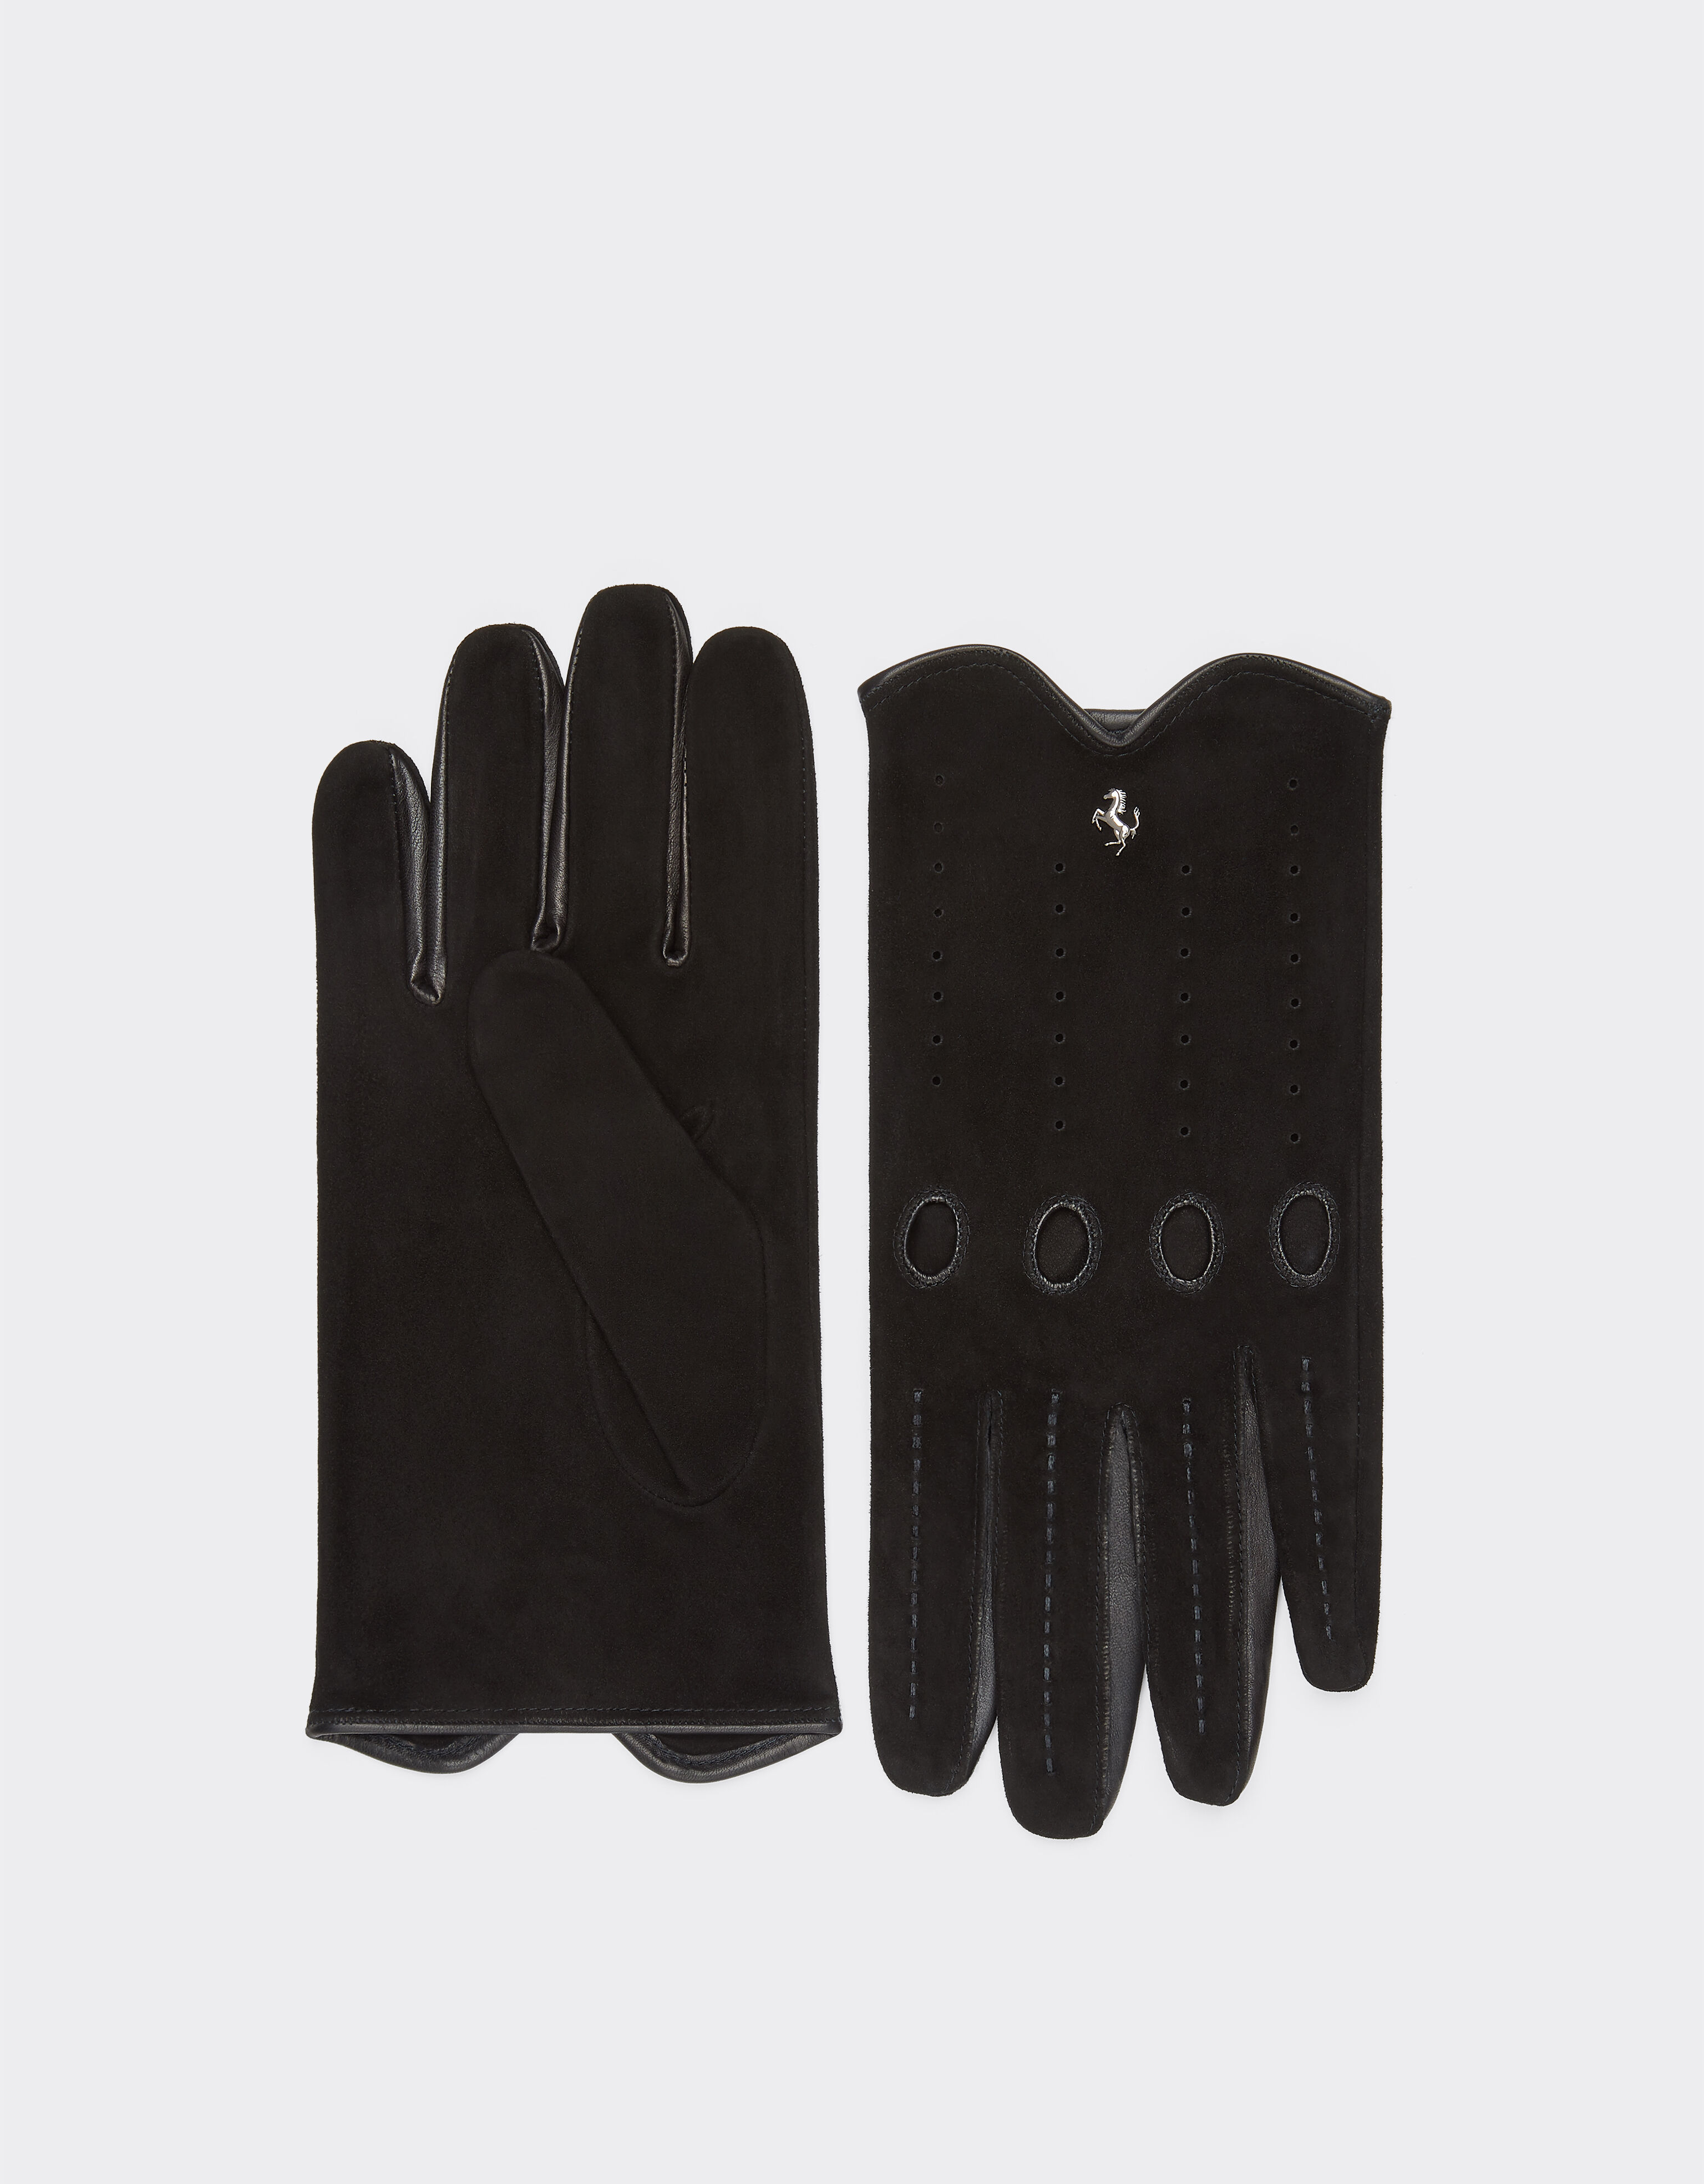 Ferrari Driving gloves in nappa leather and suede Navy 20815f